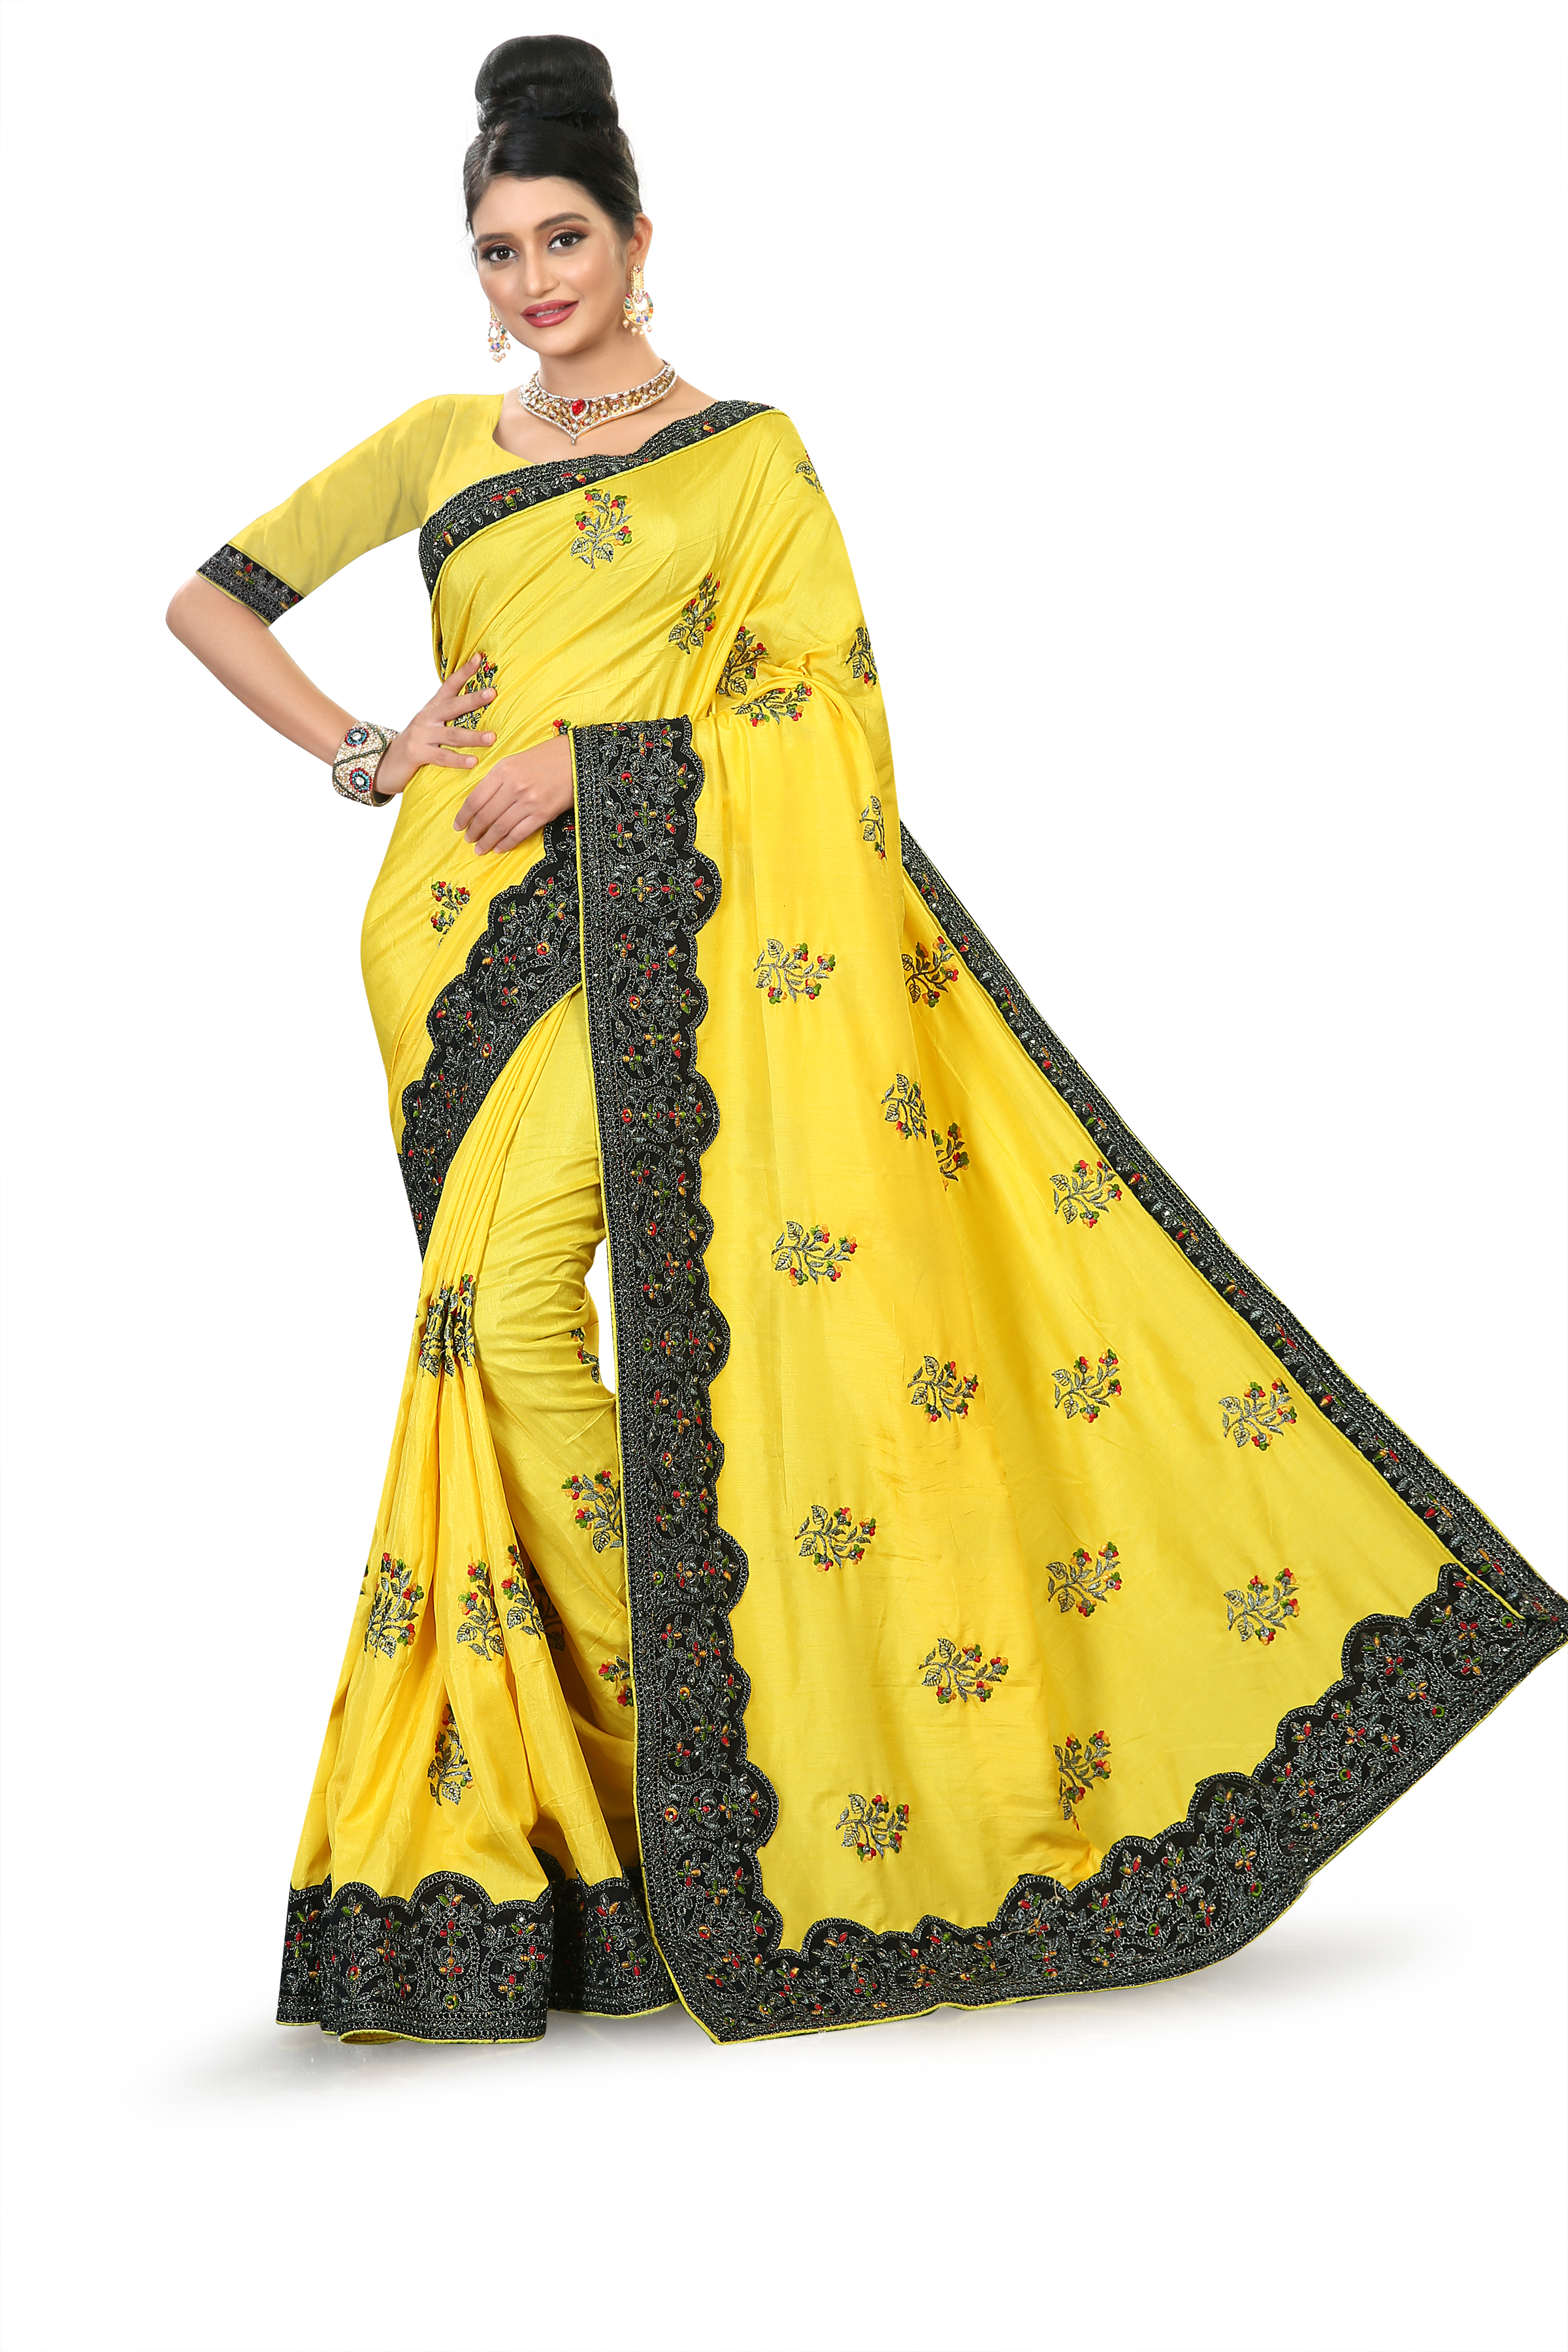 Ranjna Access Occasional Wear Traditional Saree Collection